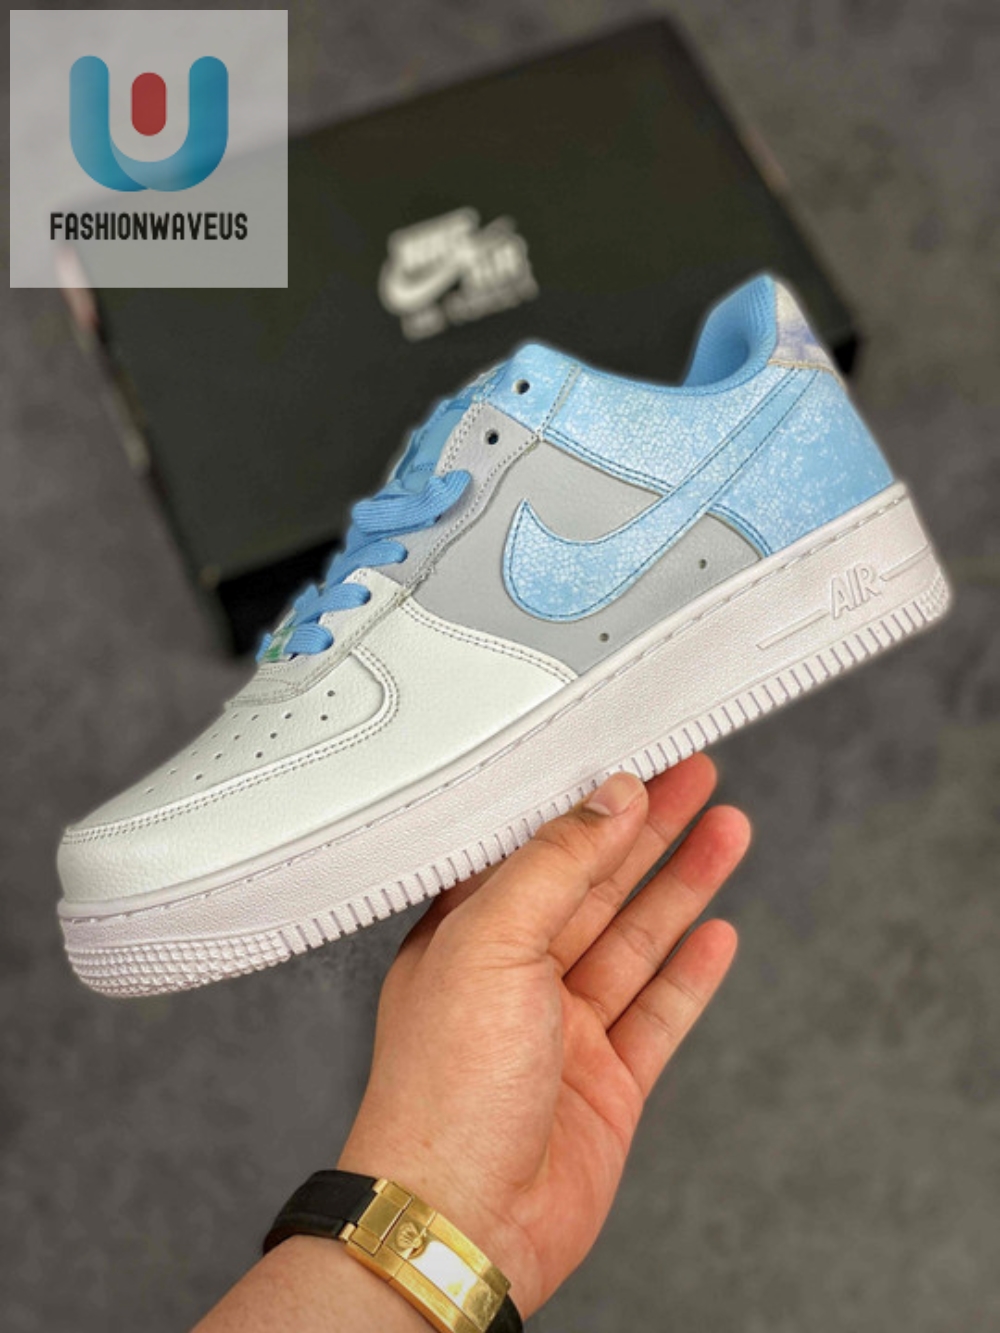 Nike Air Force 1 Low Psychic Blue Cz0337400 